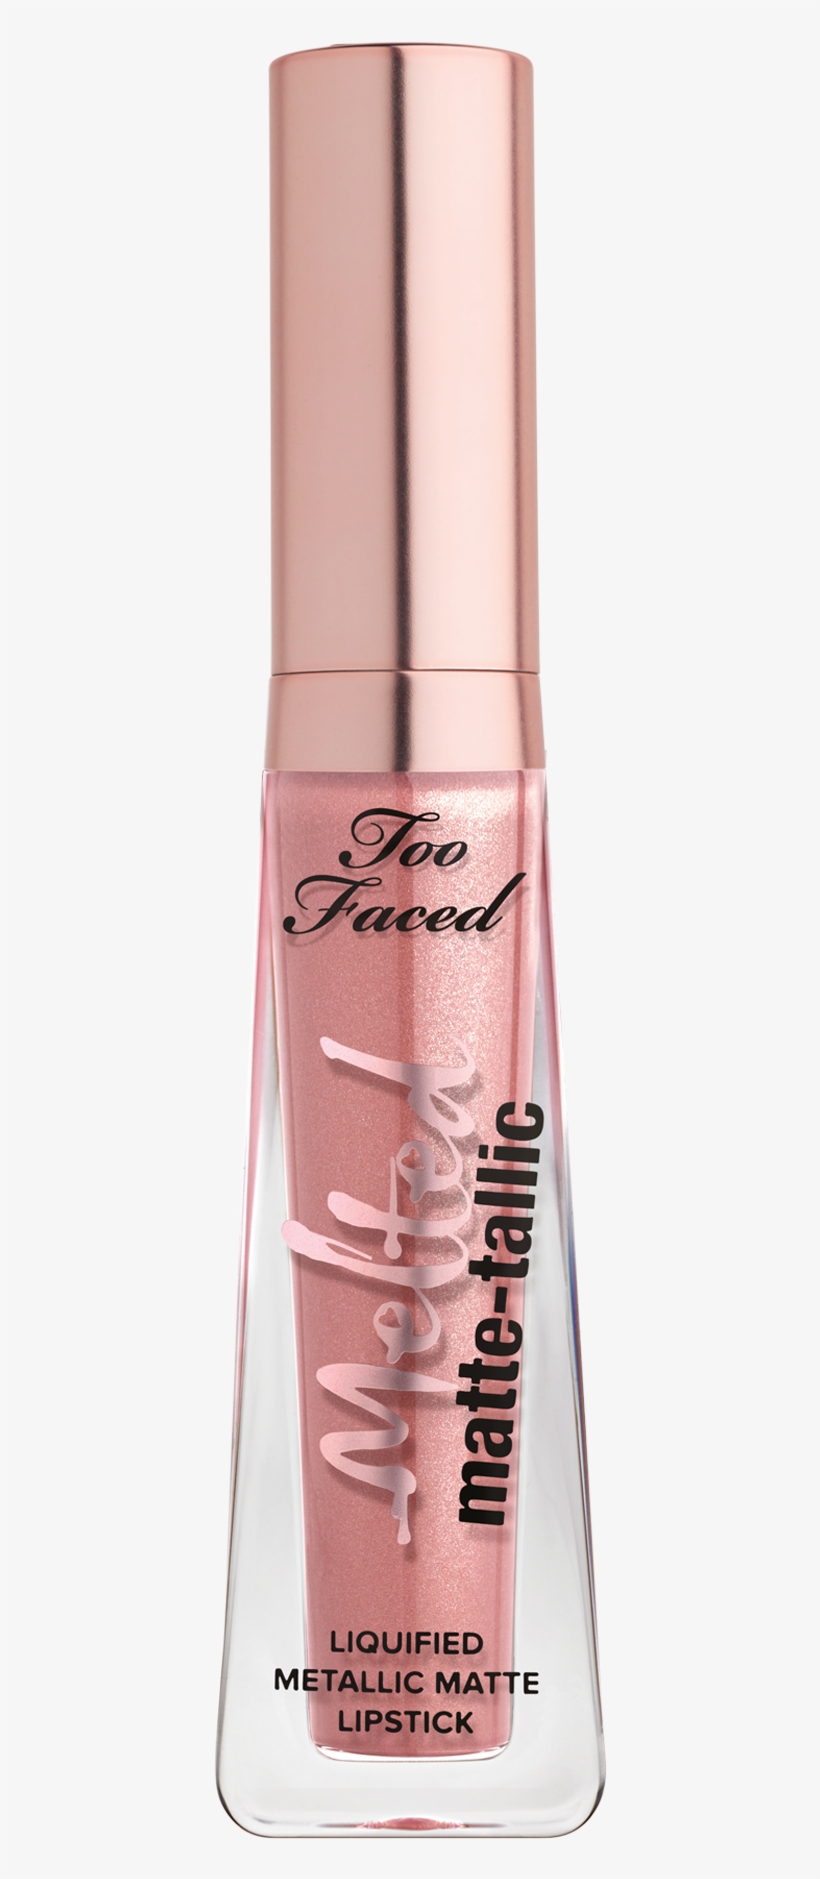 Melted - Too Faced, transparent png #8916344